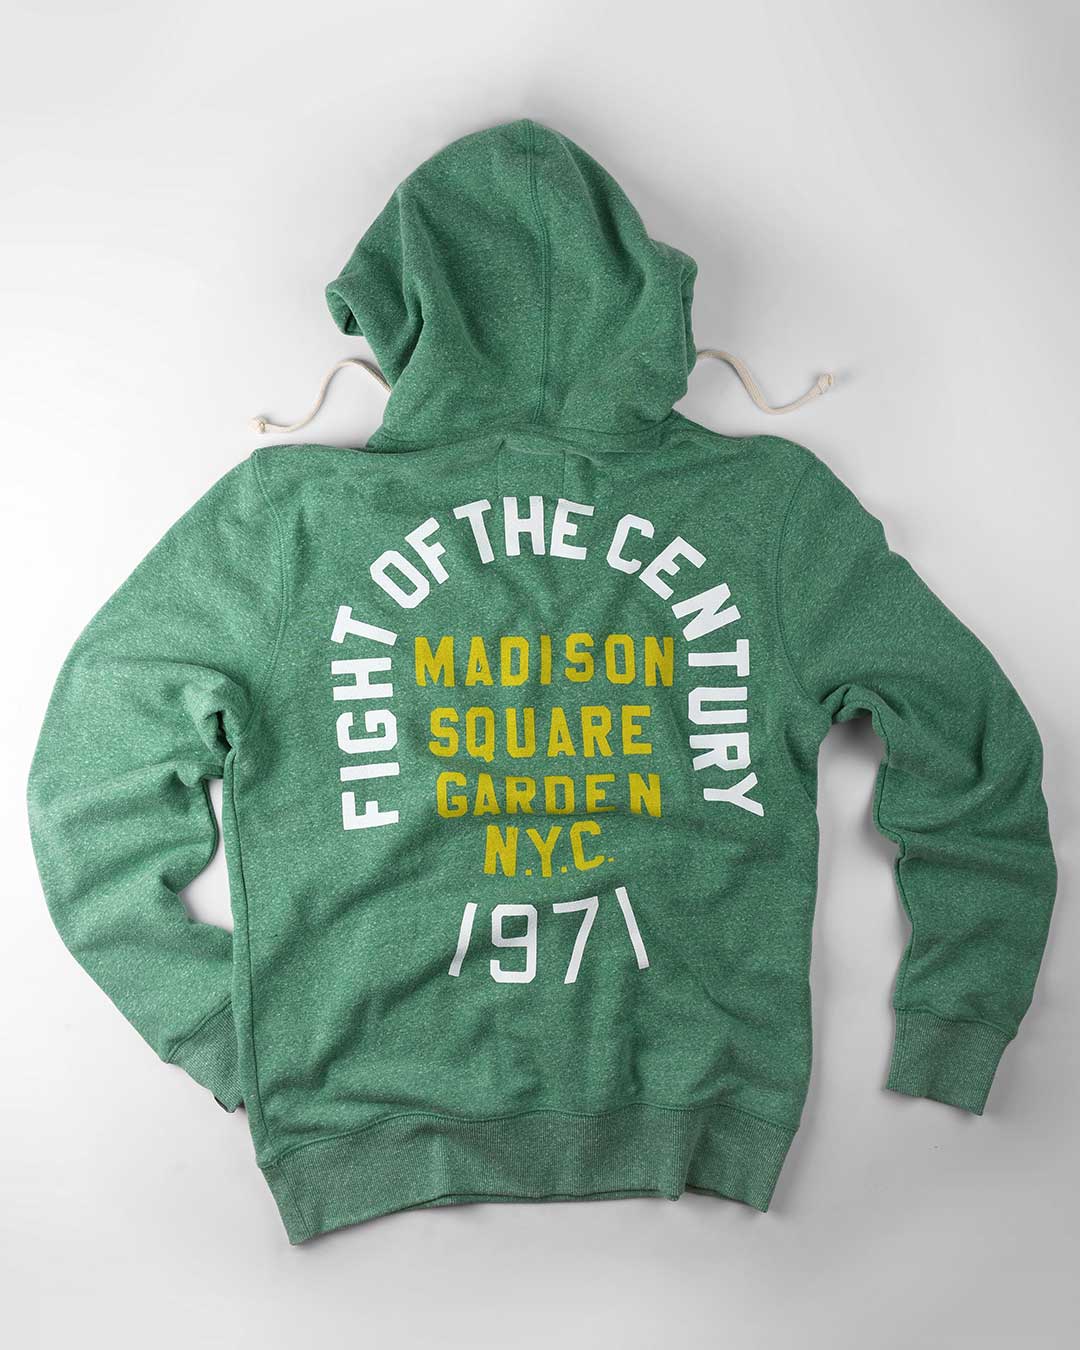 FOTC - Frazier 1971 MSG Green Hoody - Roots of Fight Canada